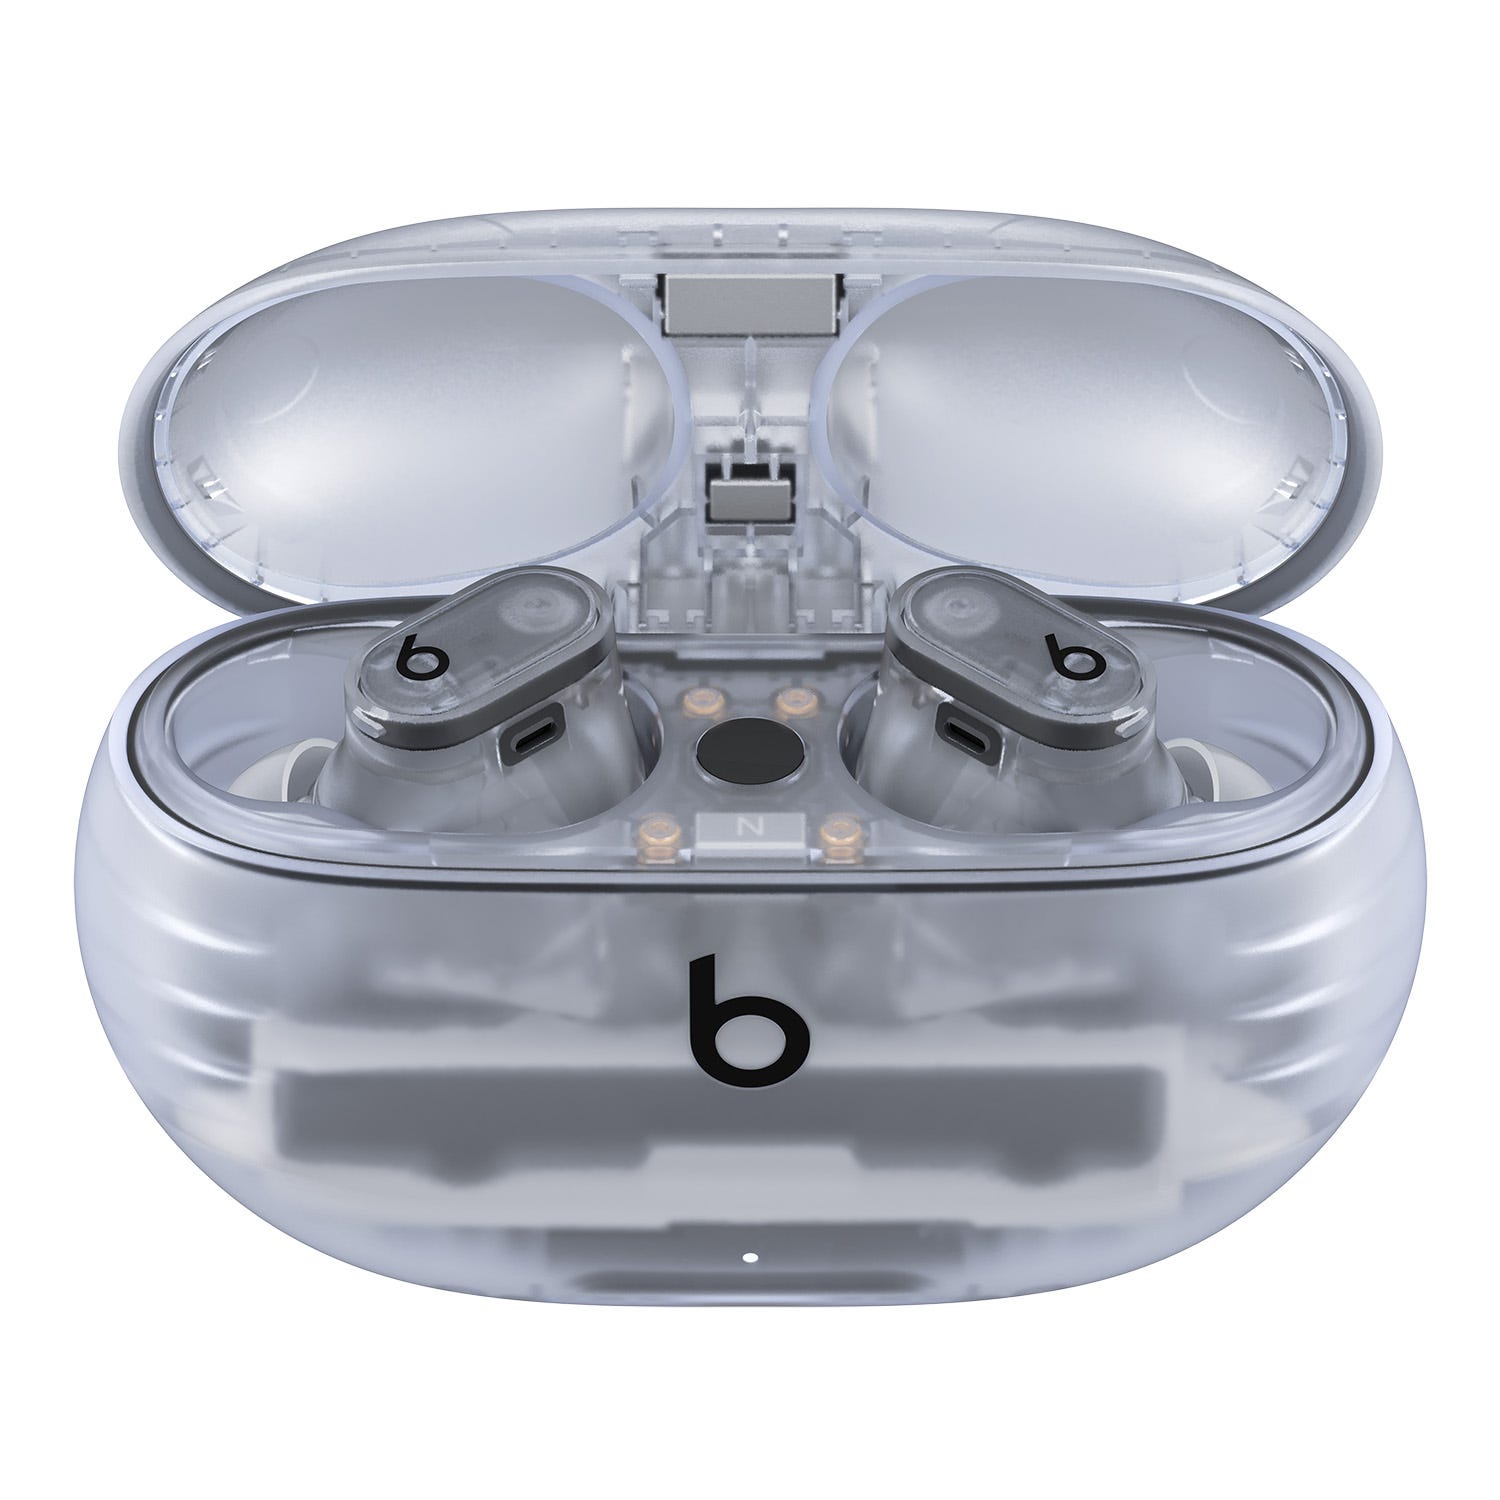 MQLK3LL/A Wireless Noise-Canceling Dr. Studio by Earbuds, Buds + Dre Transparent Beats